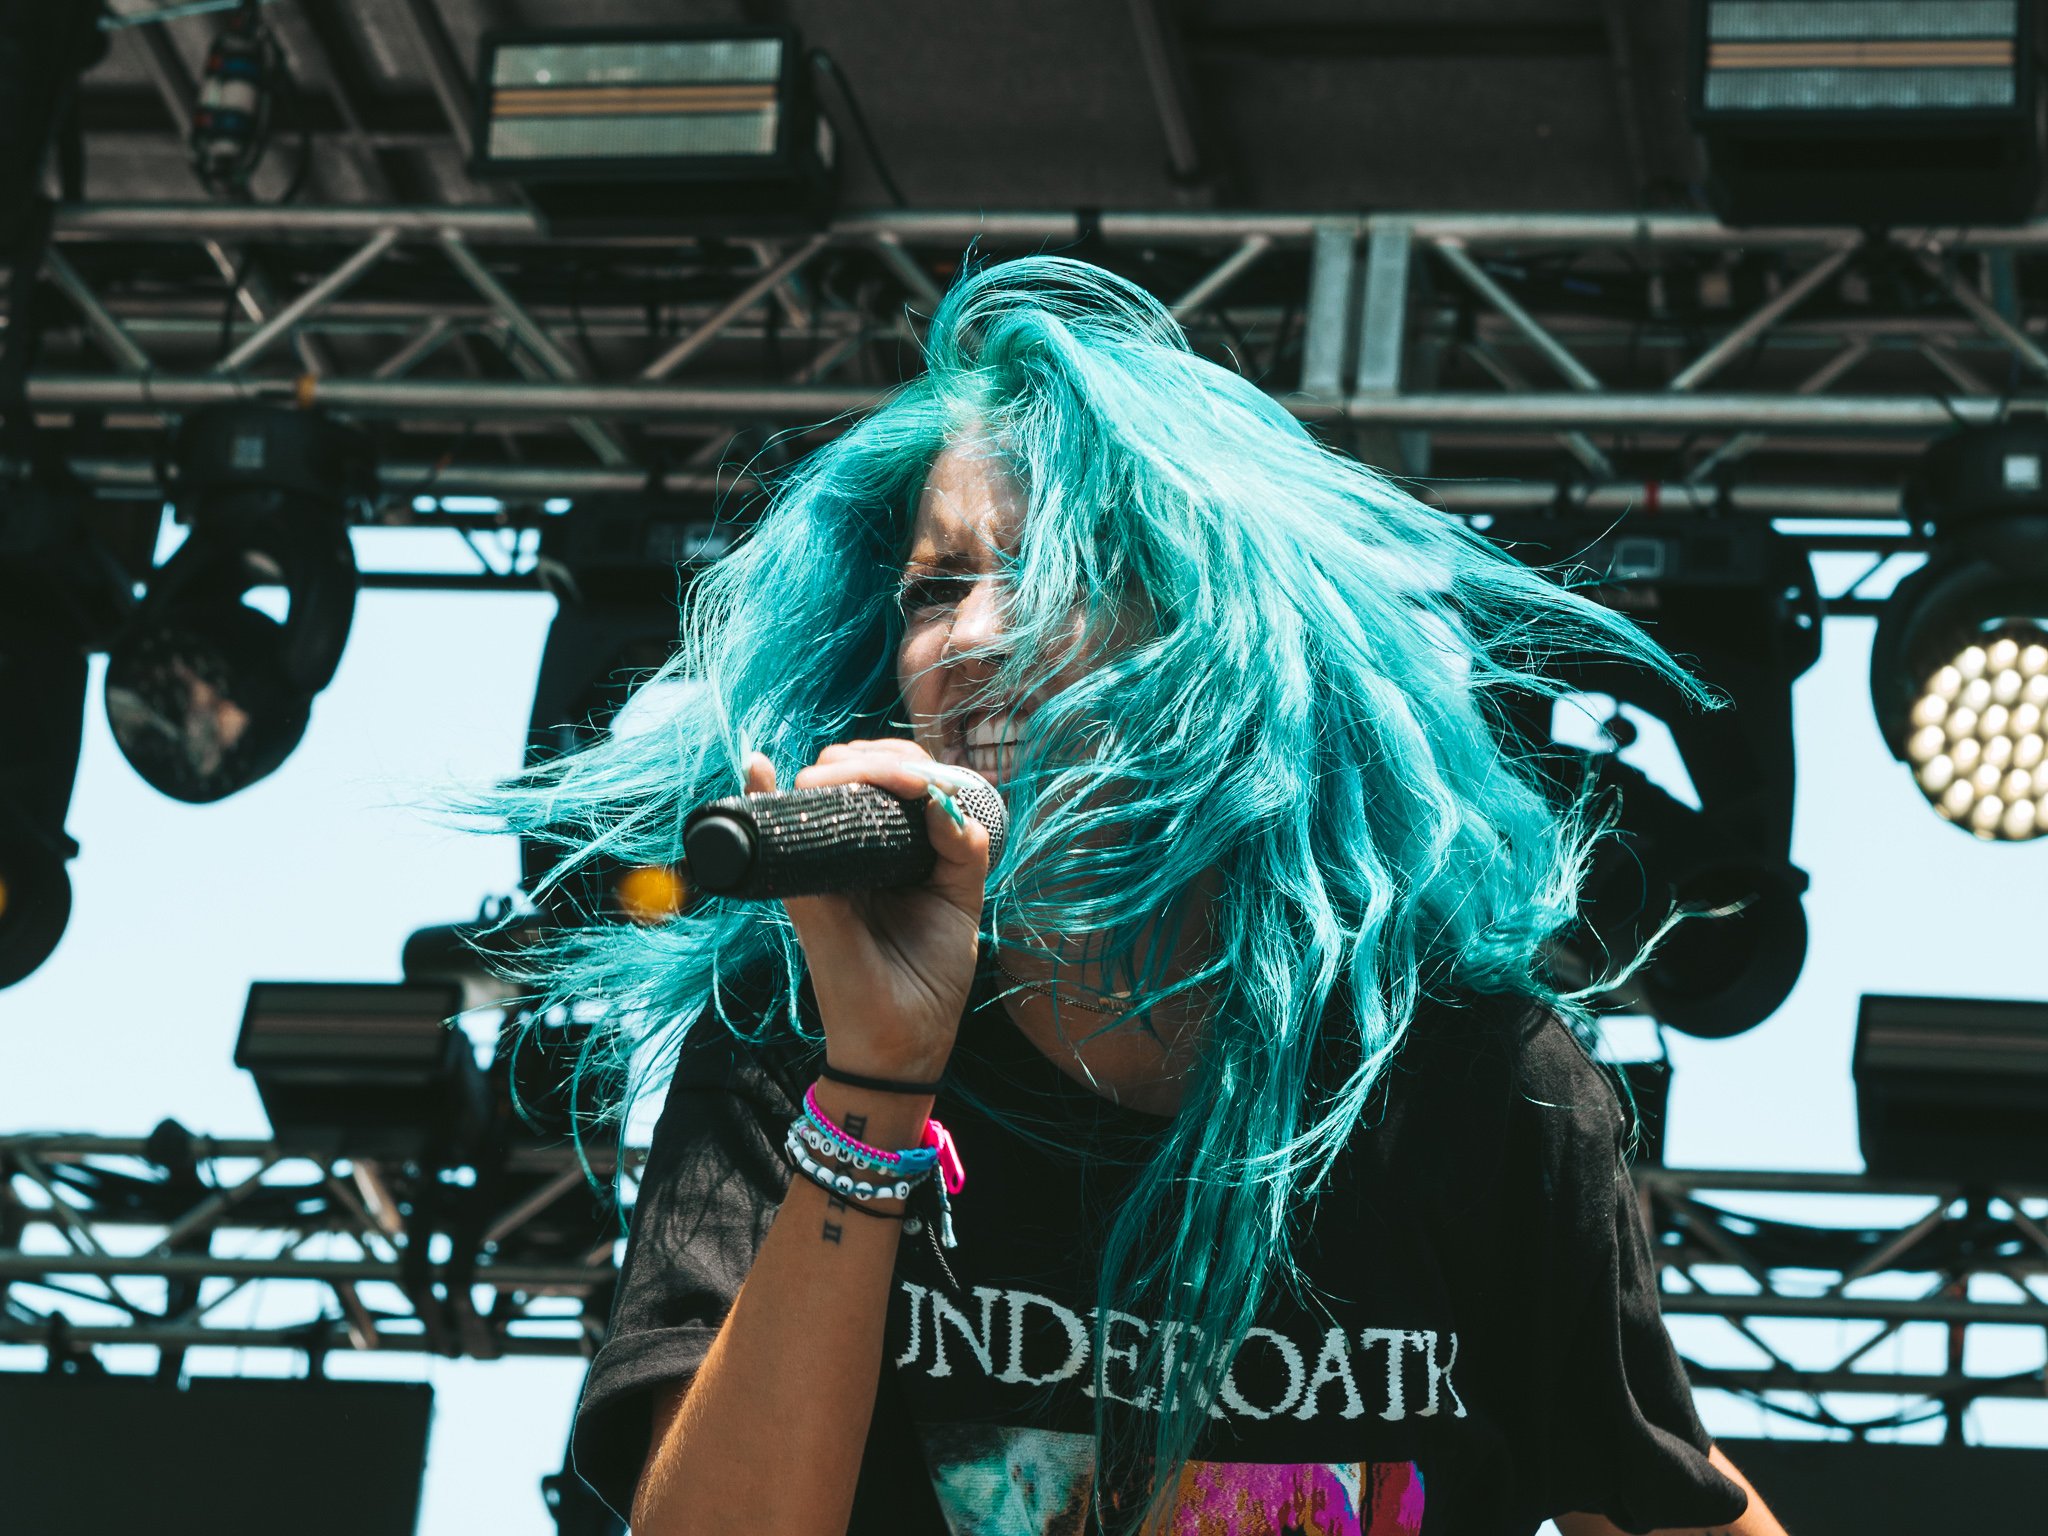  Alternative pop singer-songwriter Charlotte Sands owns the Hot Topic stage with her energetic performance. 